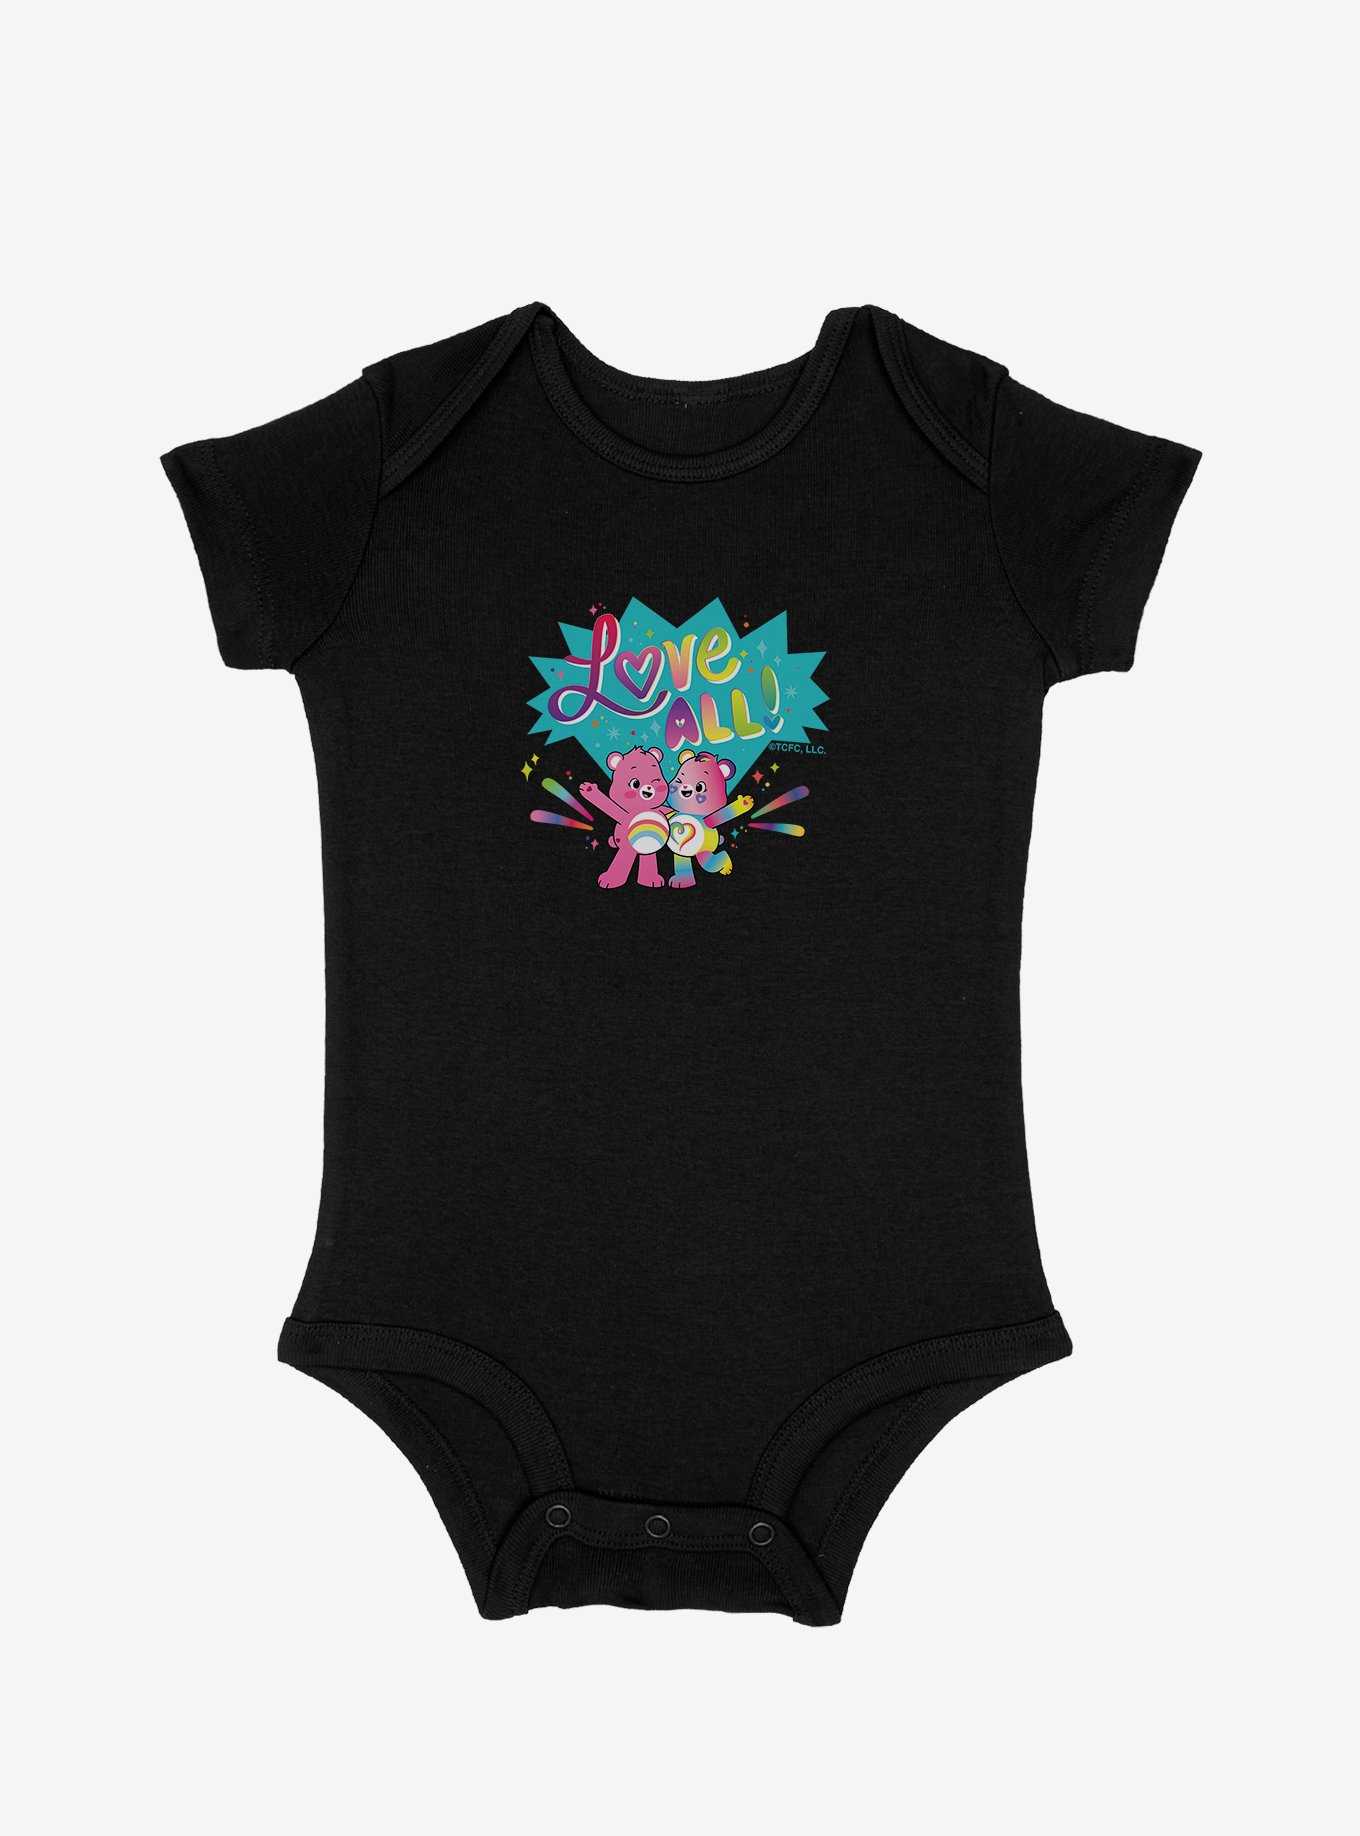 Care Bears Love All Duo Infant Bodysuit, , hi-res